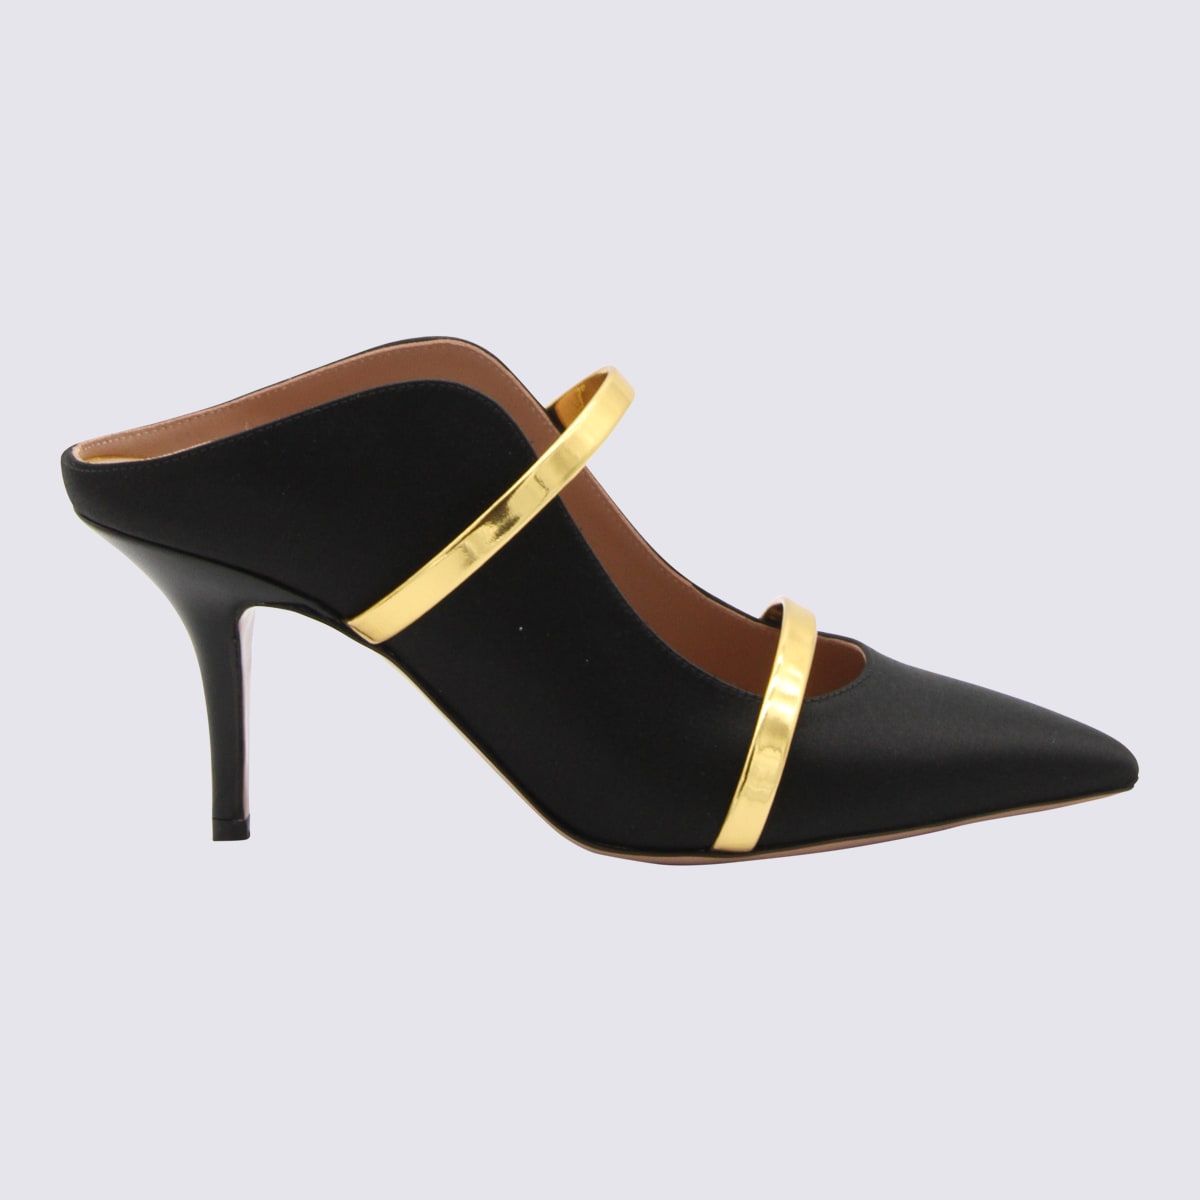 Malone Souliers Black And Gold Leather Maureen Pumps